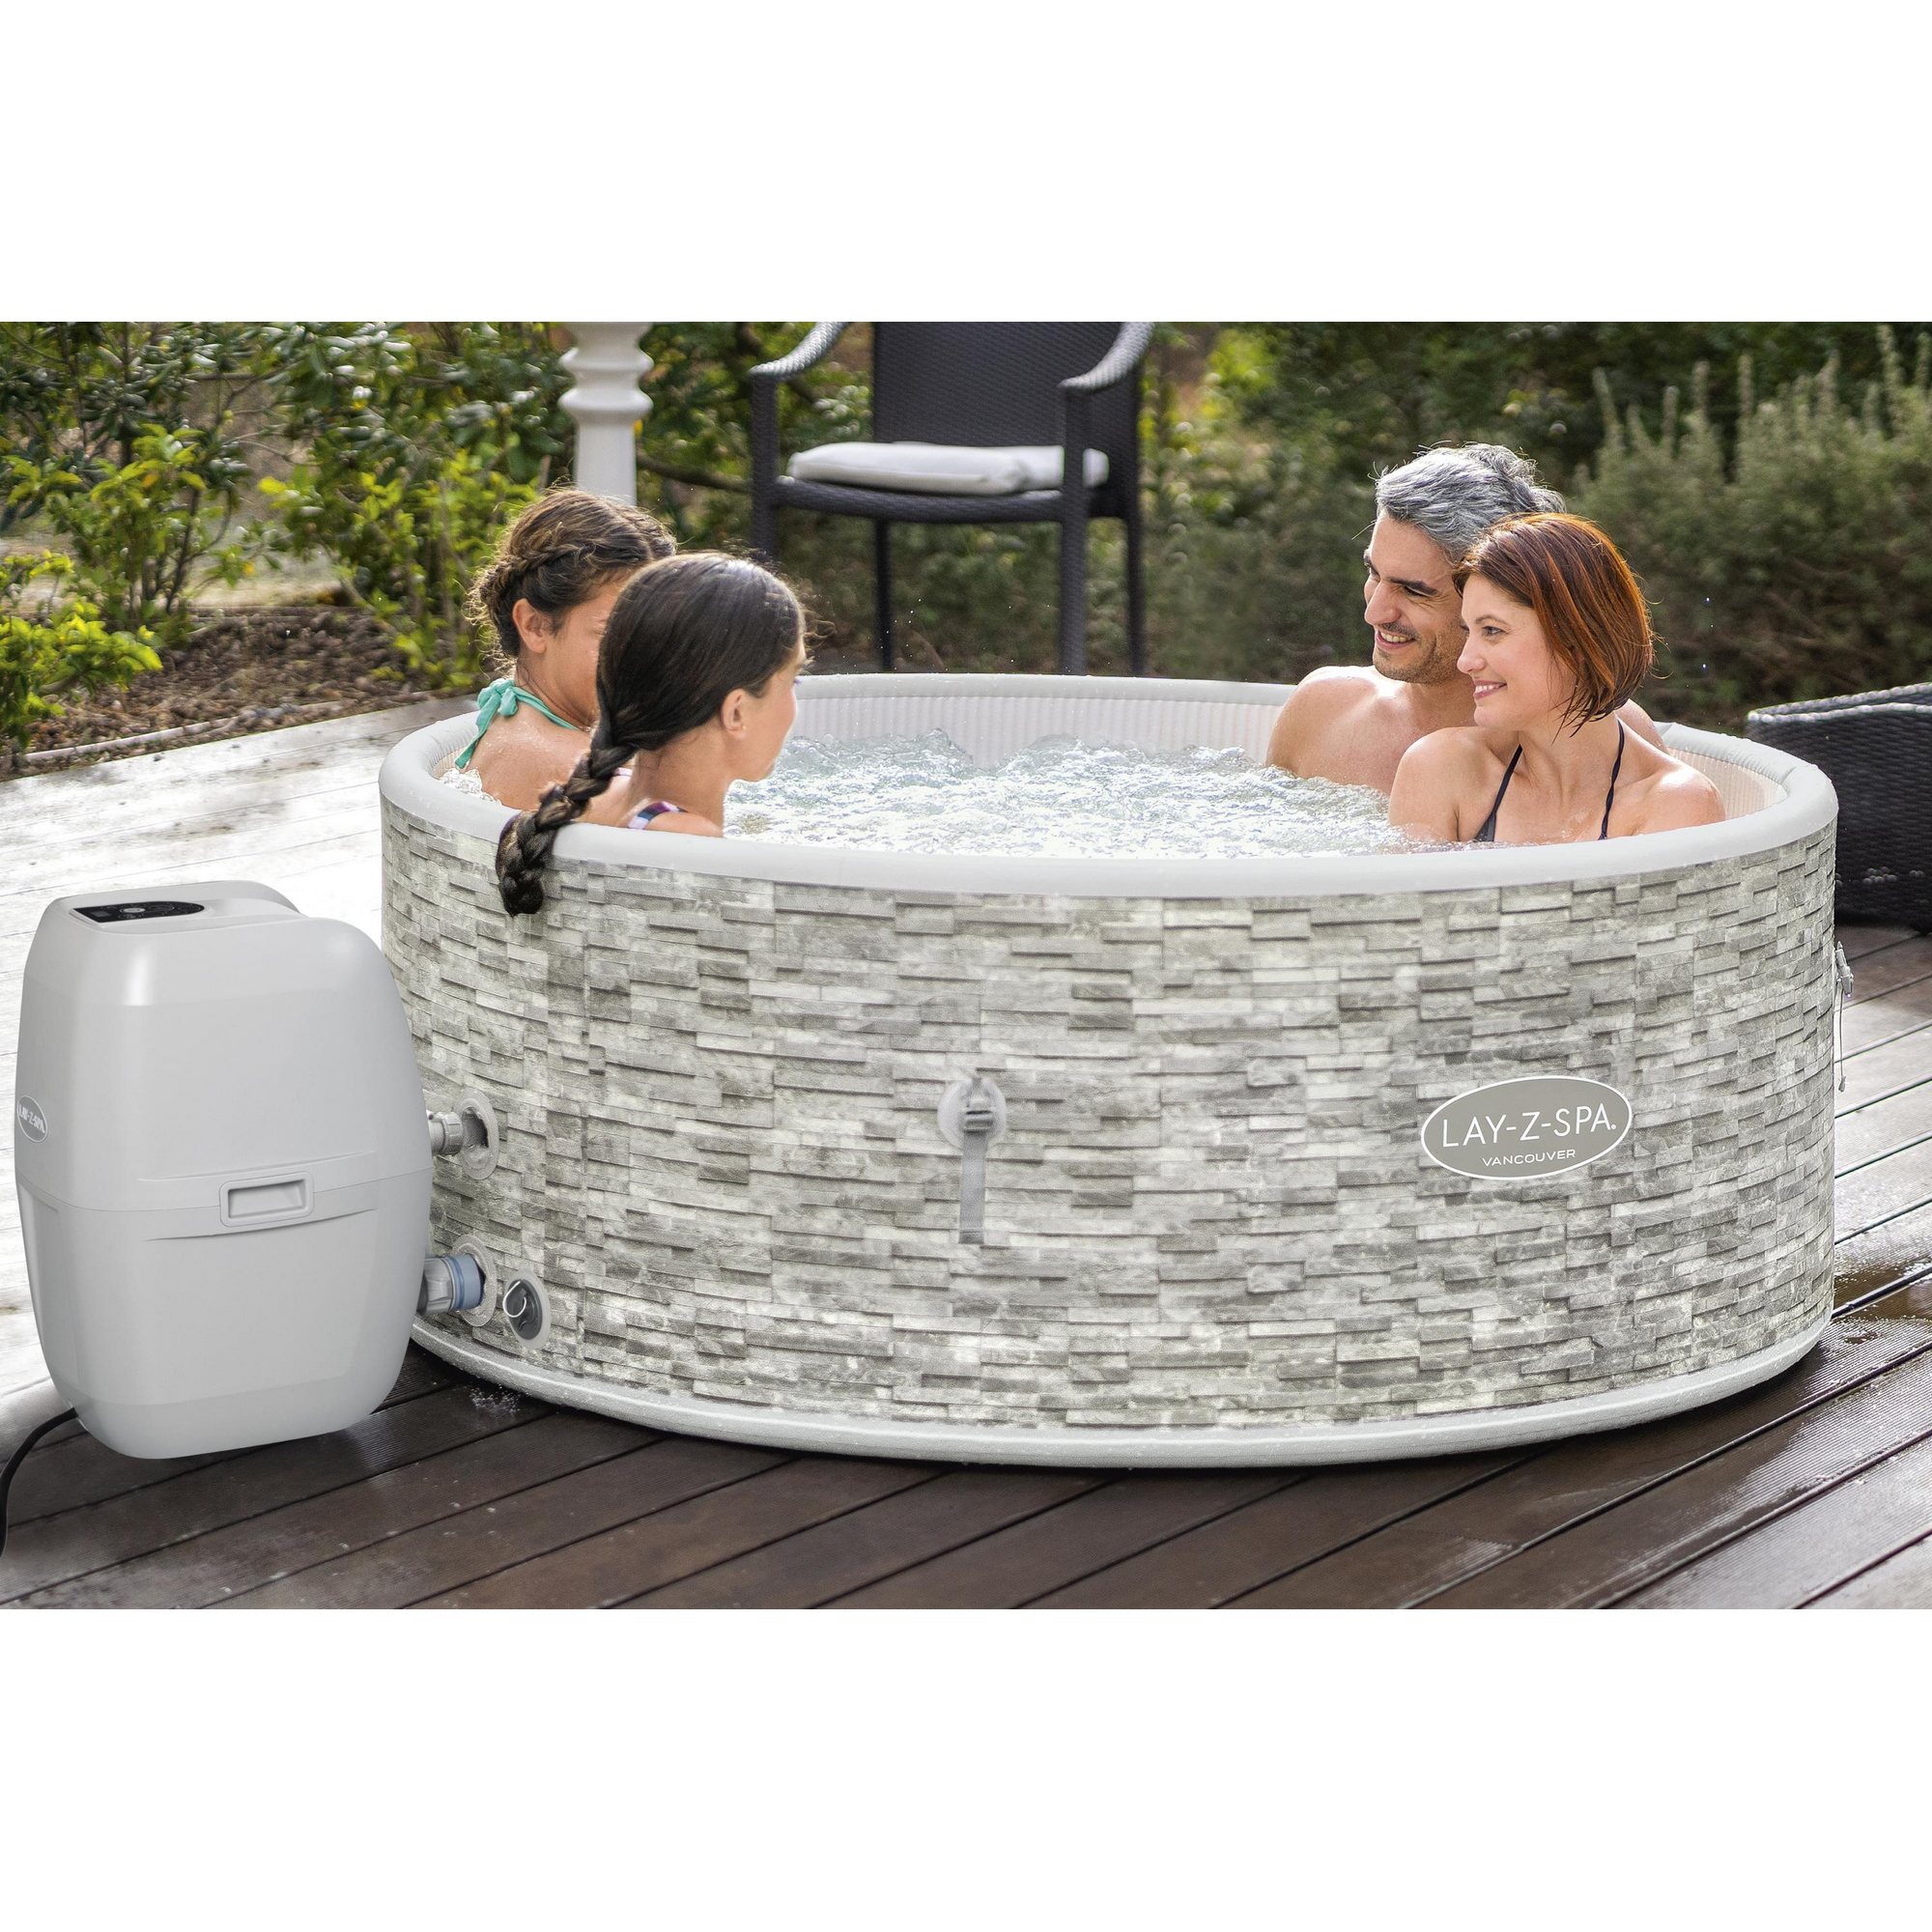 WLAN-Whirlpool 'LAY-Z-SPA Vancouver AirJet Plus' 155 x 60 cm grau + product picture